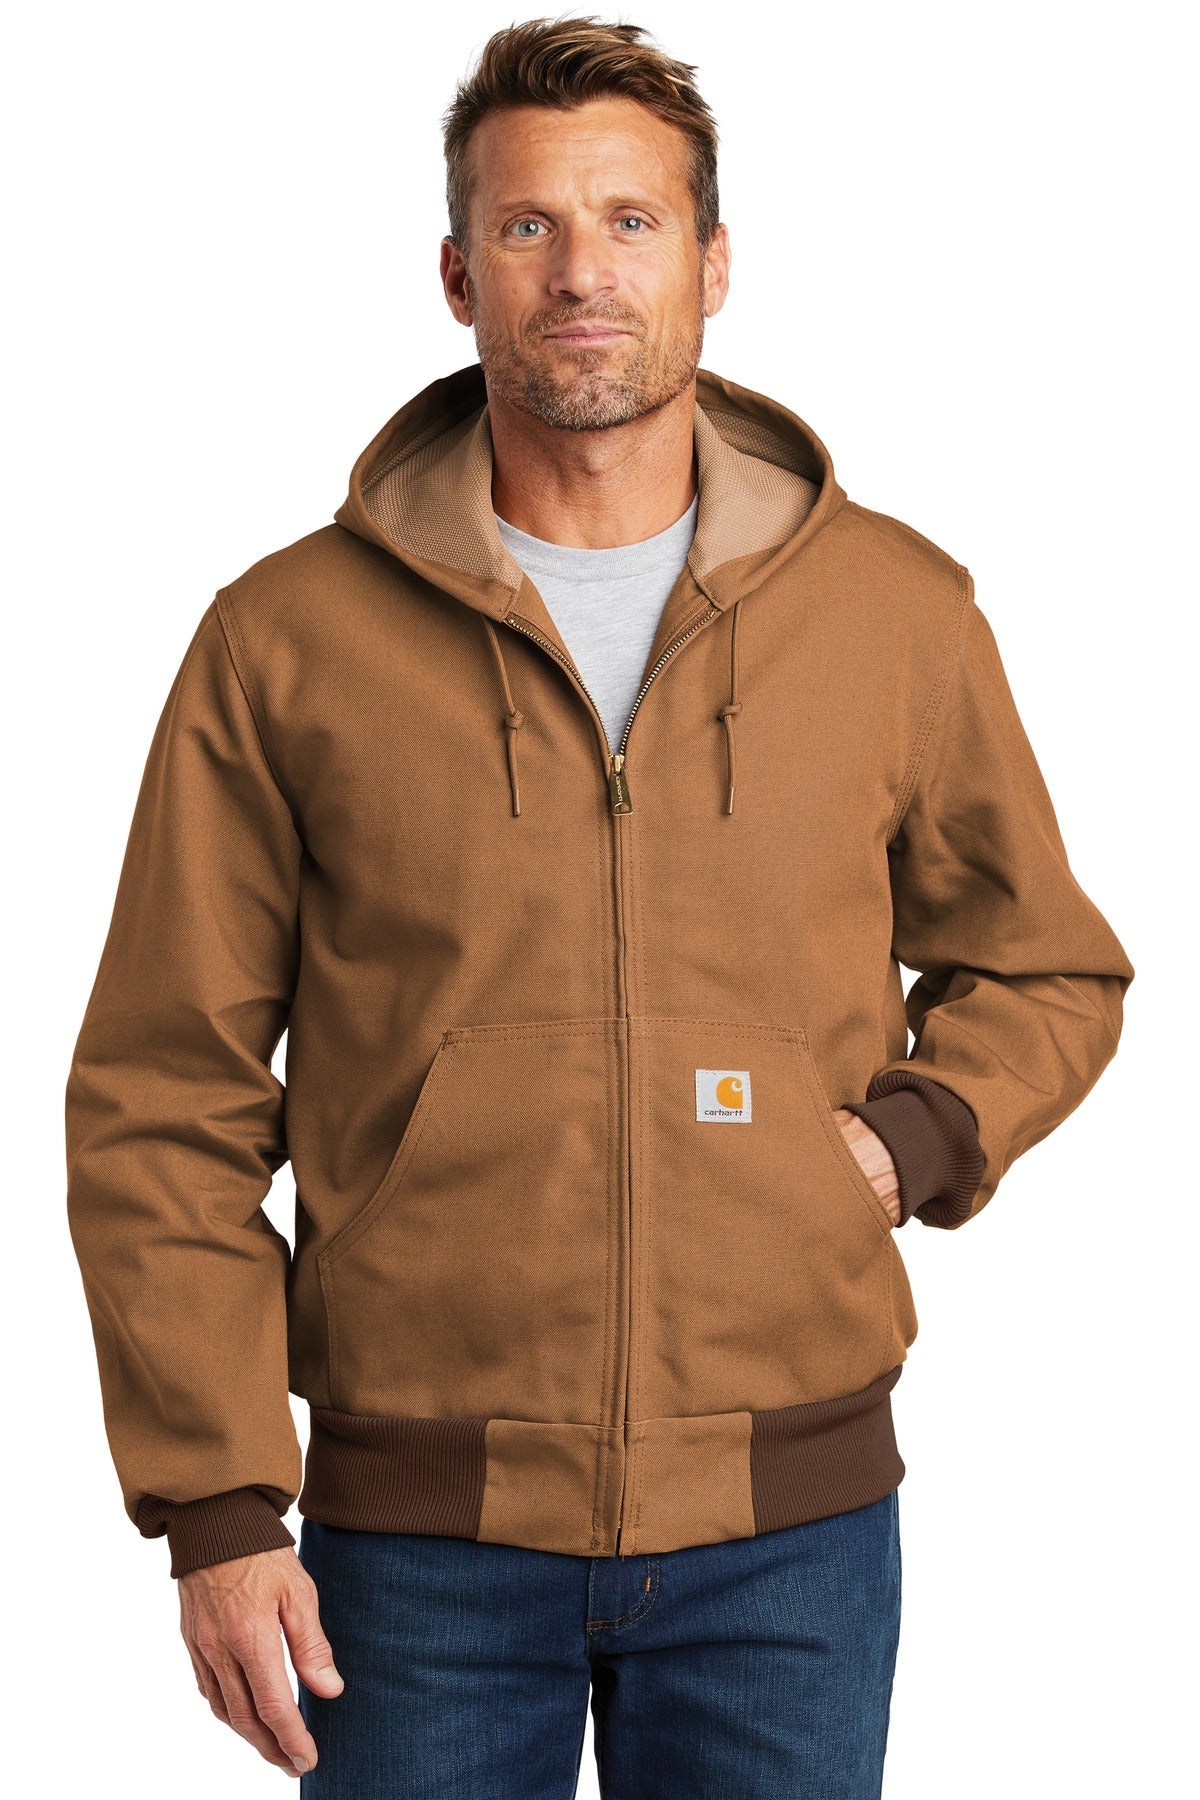 Carhartt ® Thermal-Lined Duck Active Jac. CTJ131 - DFW Impression